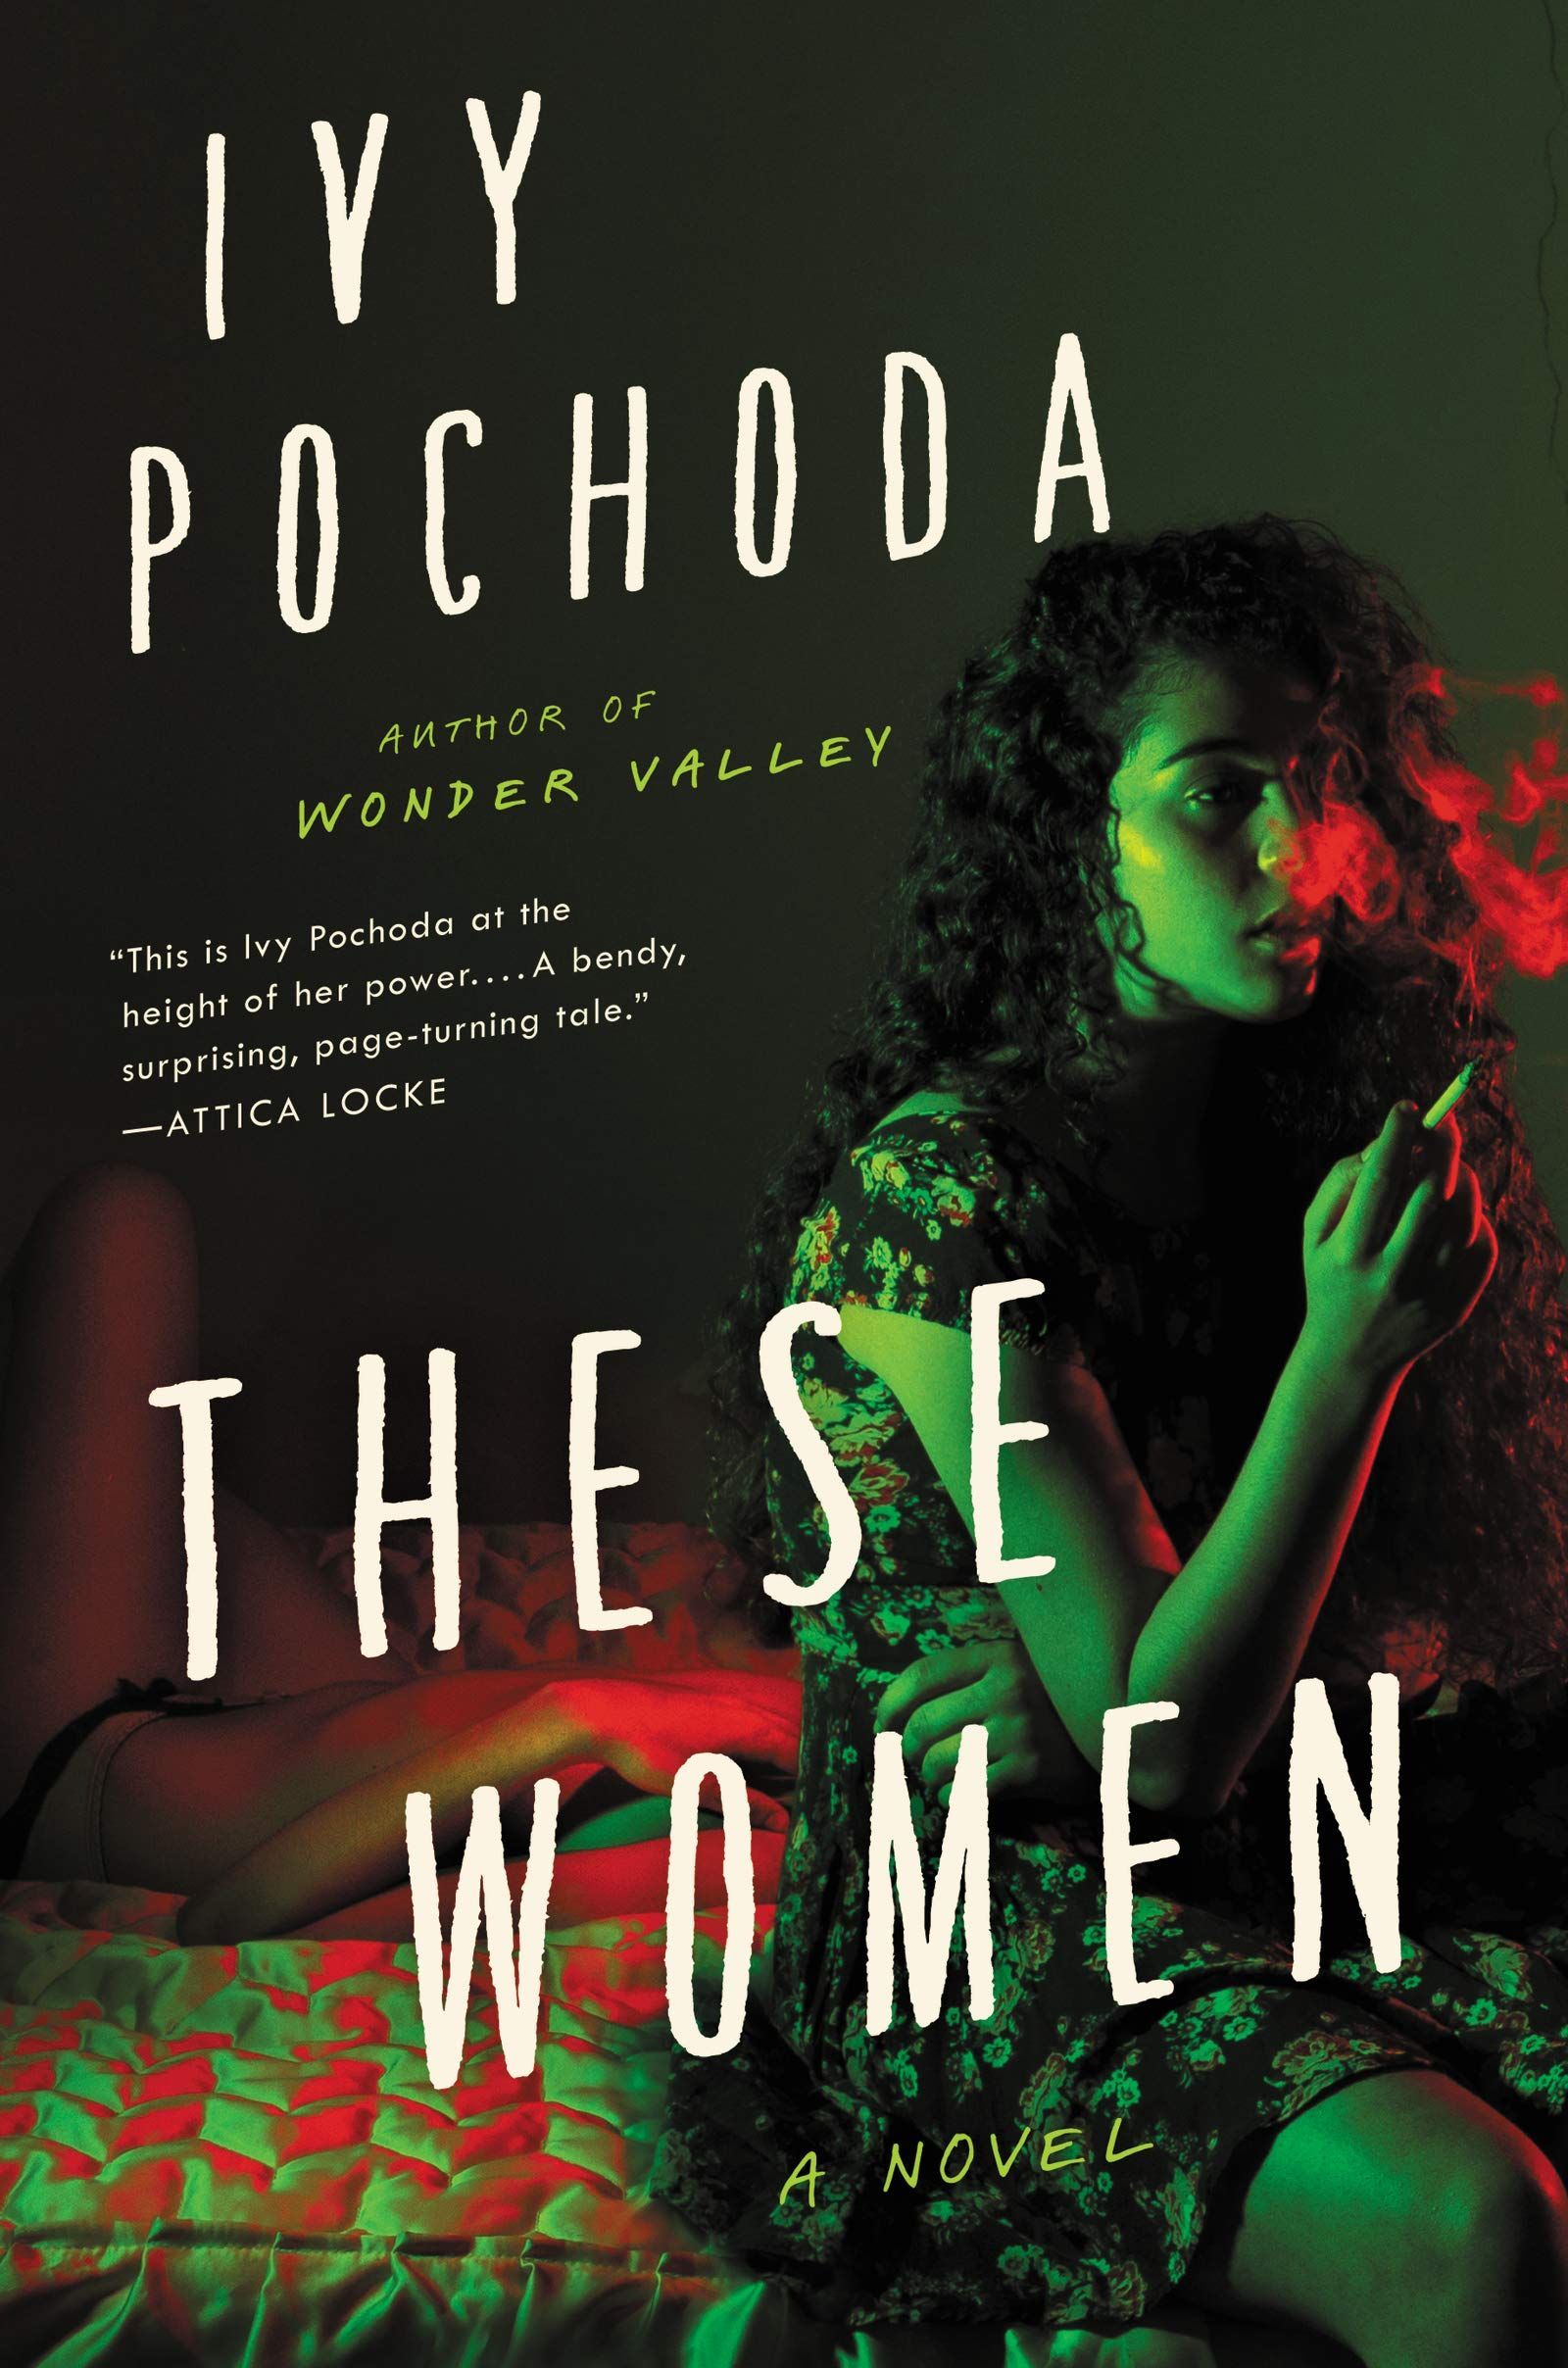 The Empath of the Overlooked: On Ivy Pochoda’s “These Women”